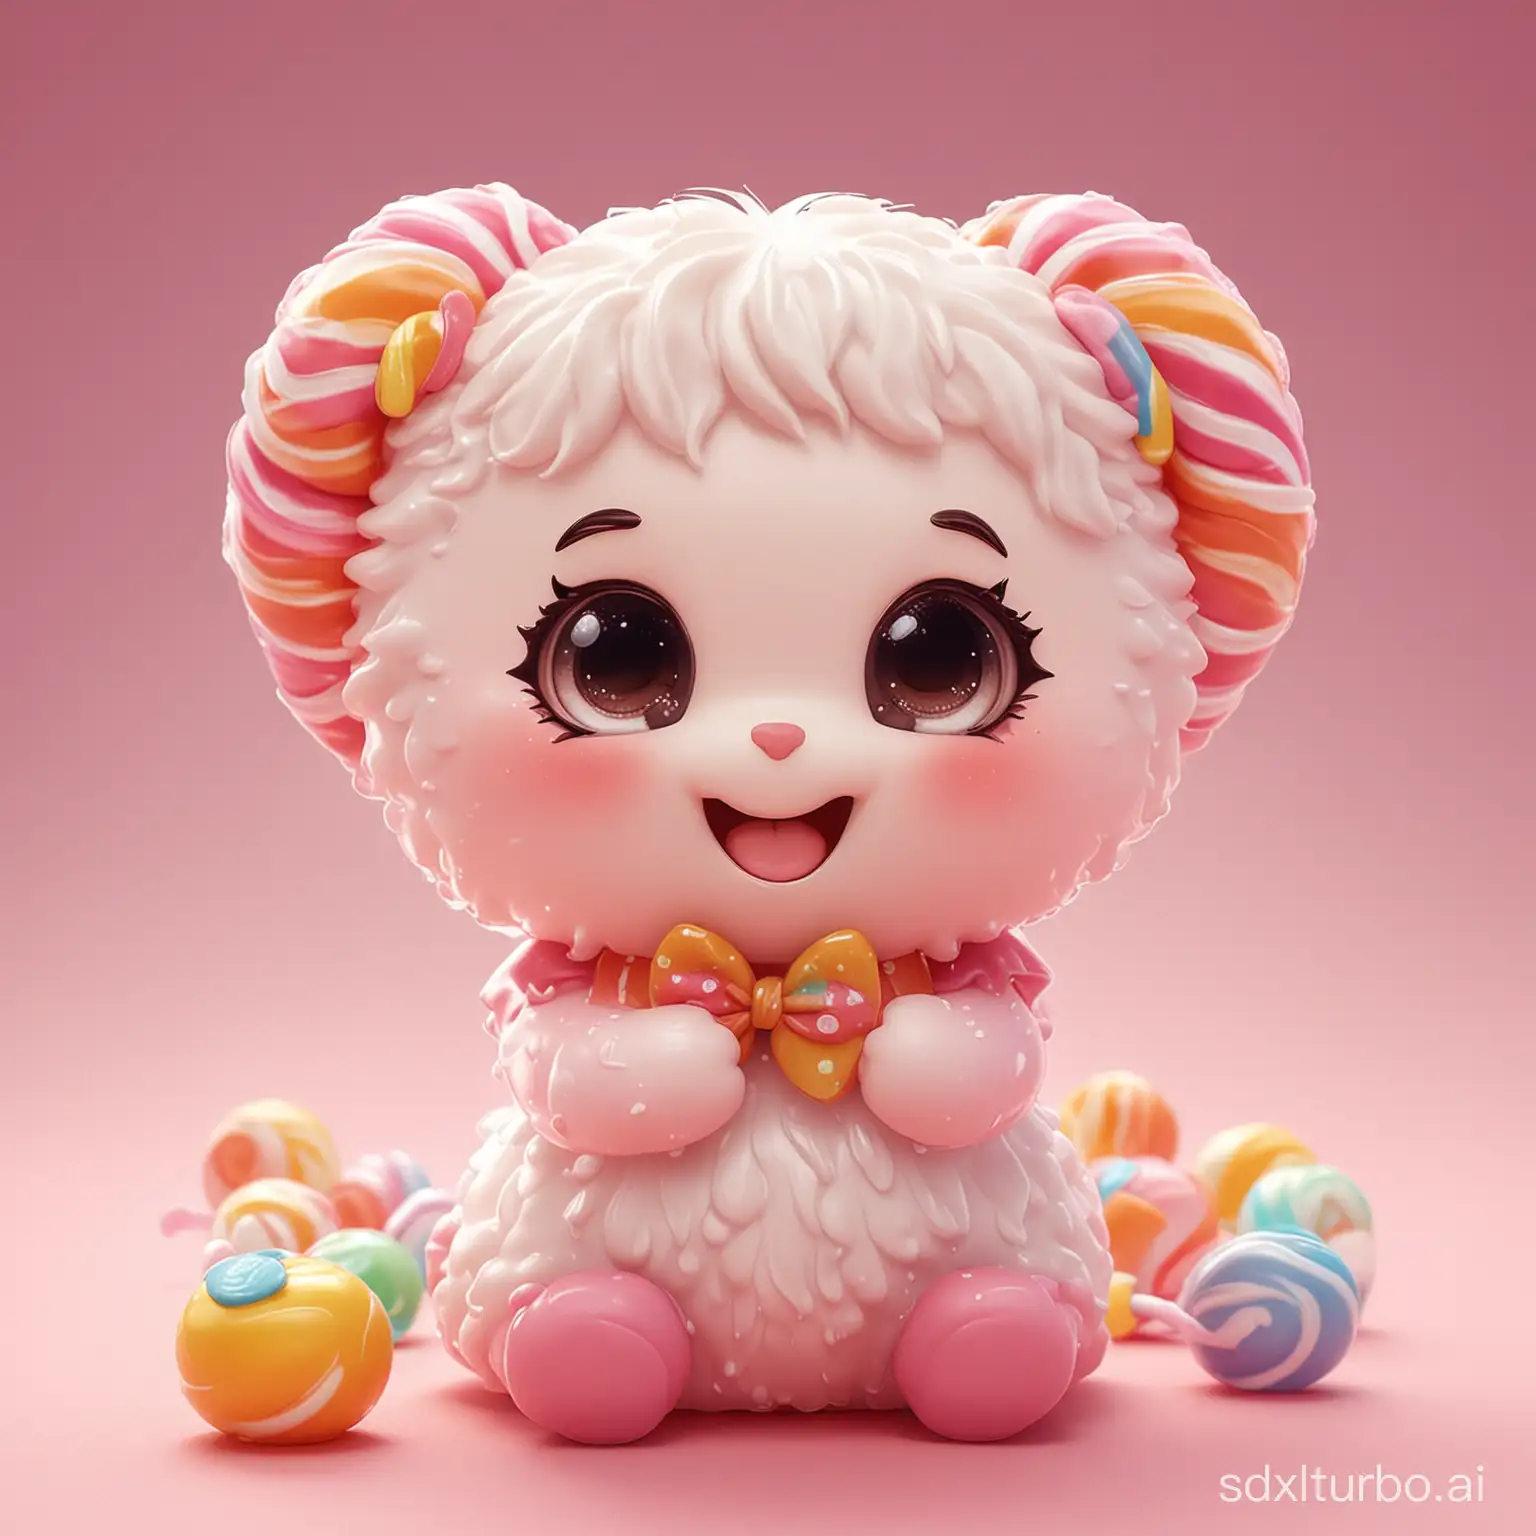 Cute, adorable, Q version candy anthropomorphism, high-definition picture, movie quality